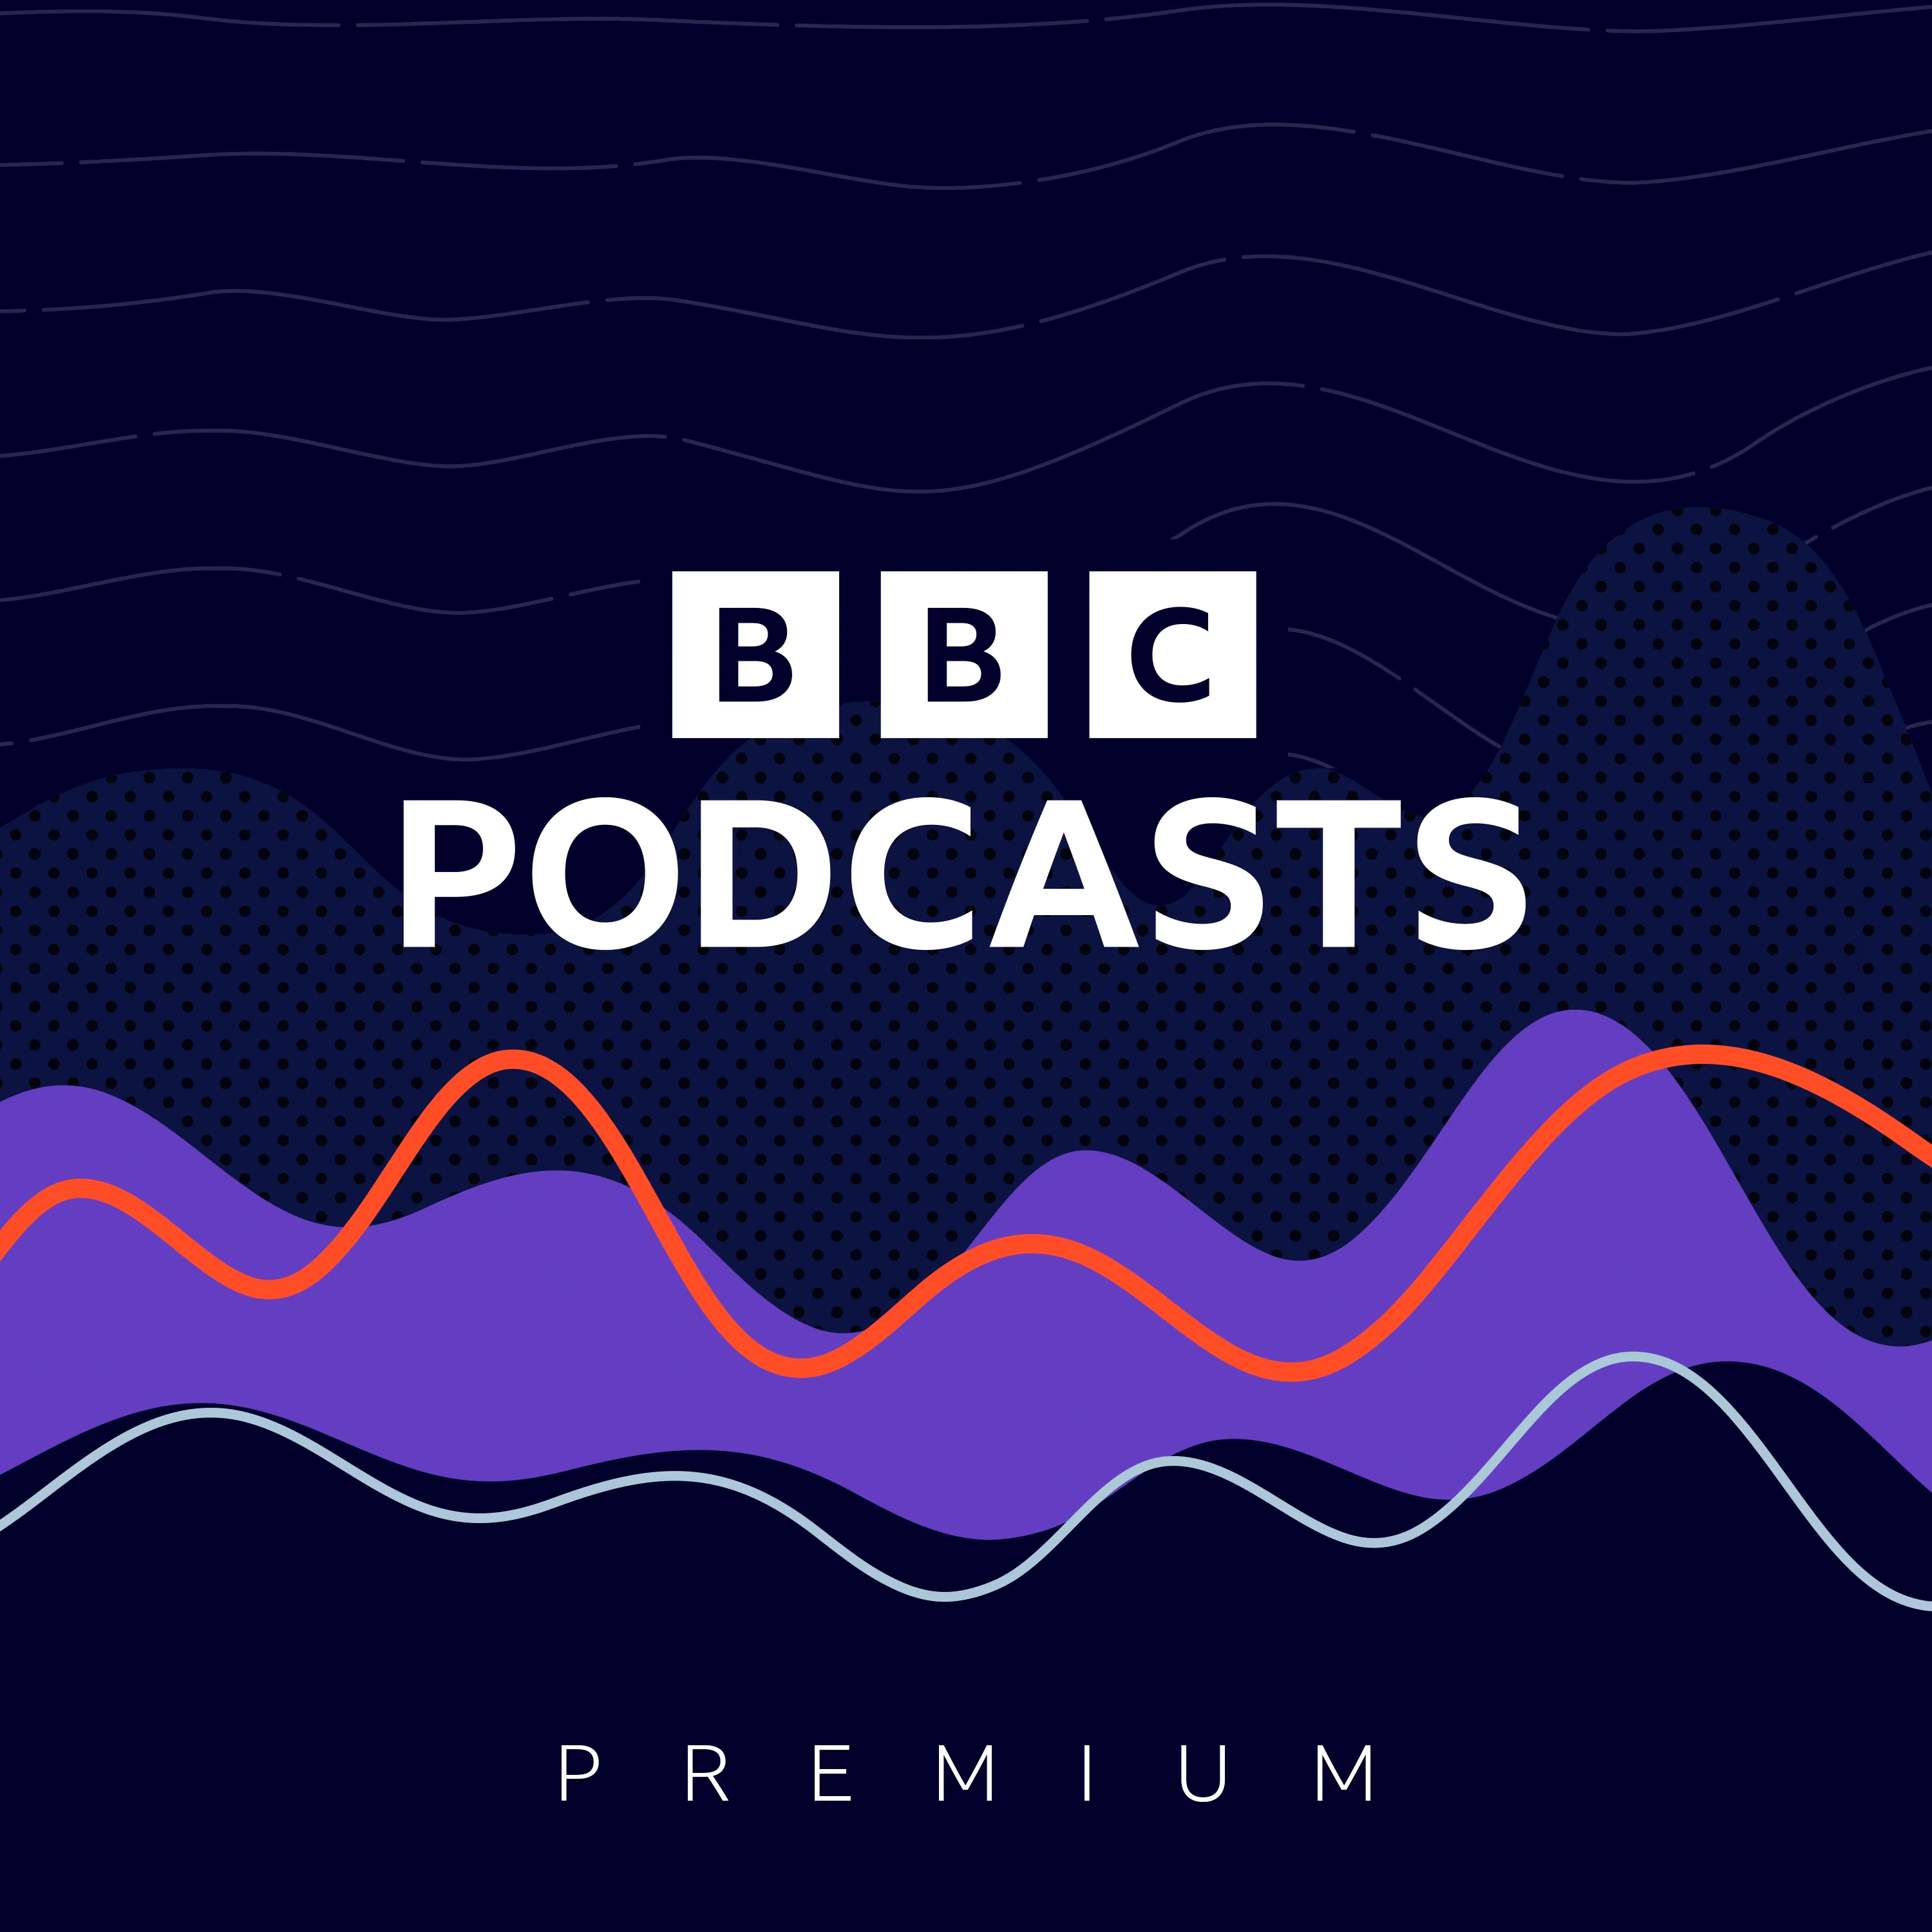 Exciting times in the UK podcast scene! My latest blog delves into the BBC's pivotal role and recent moves, including BBC Studios' global audio expansion and the introduction of 'BBC Podcasts Premium' for international audiences. 